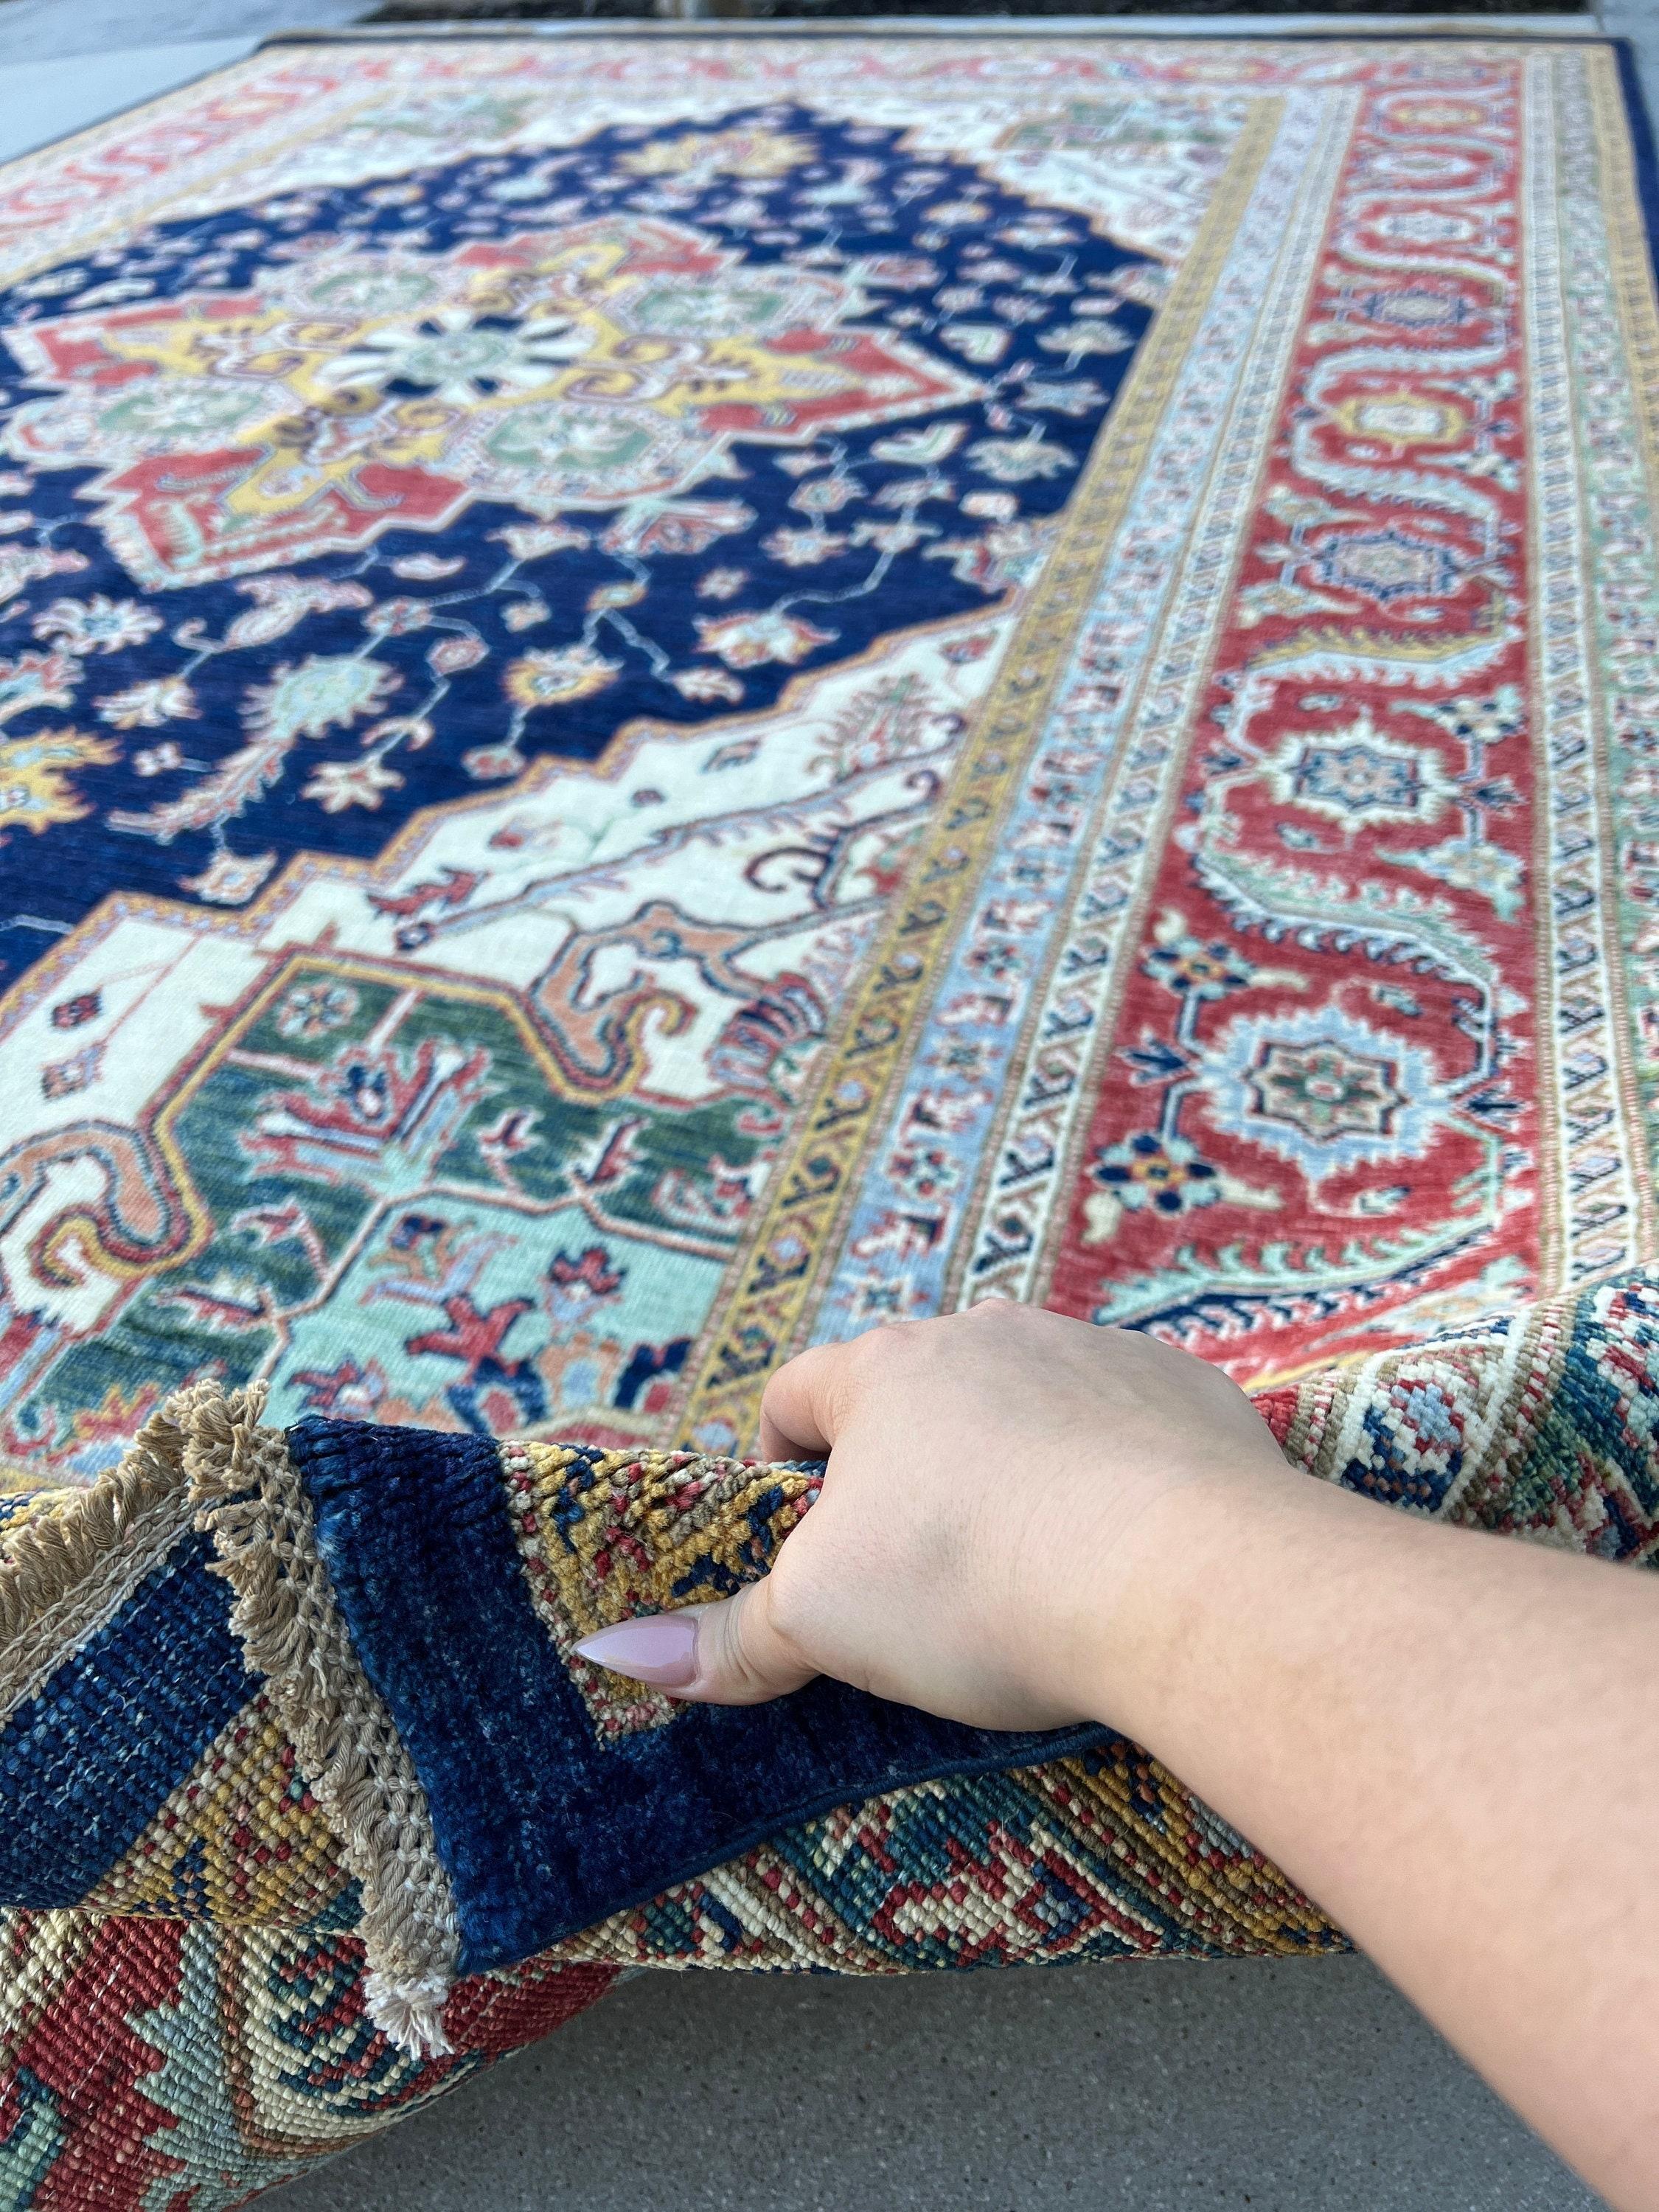 Contemporary Hand-Knotted Afghan Heriz Rug Premium Hand-Spun Afghan Wool Fair Trade For Sale